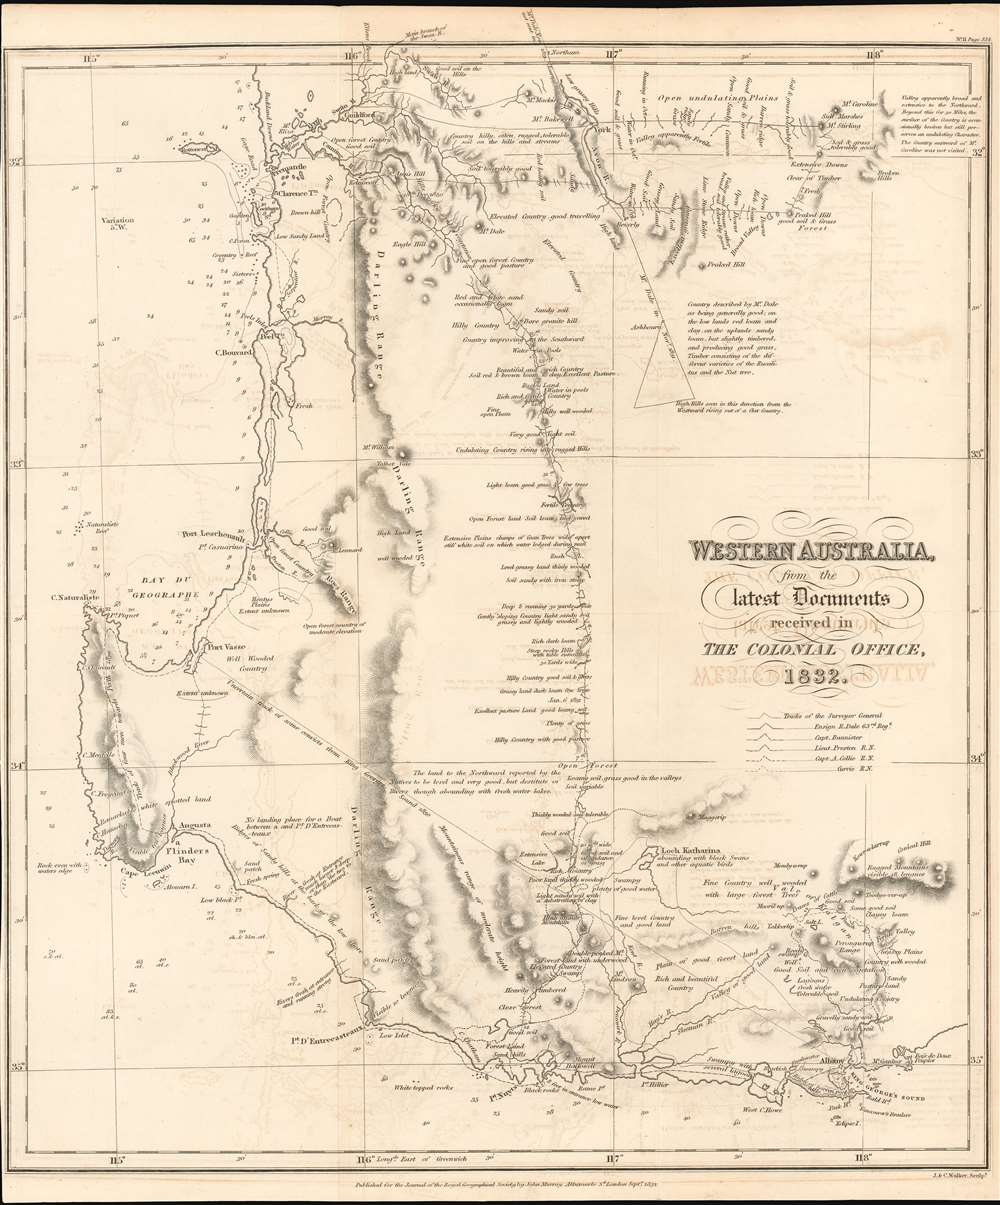 Western Australia from the Latest Documents received in The Colonial Office 1832. - Main View